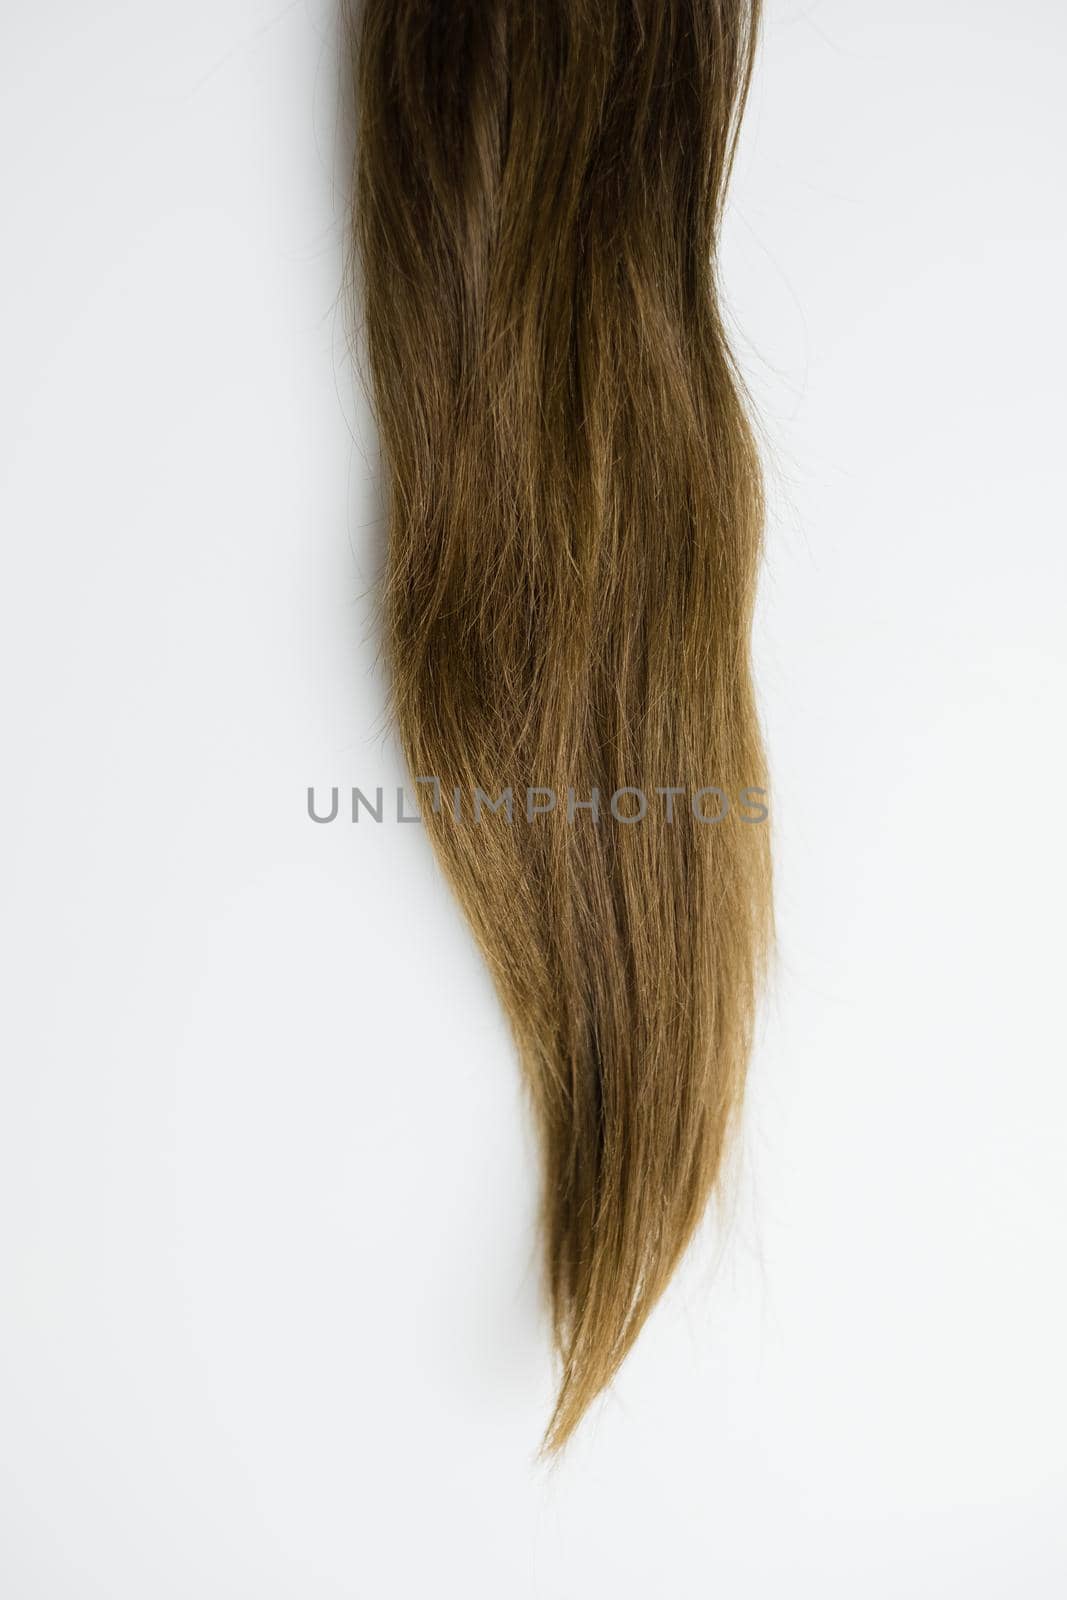 Women's long hair on a white background.